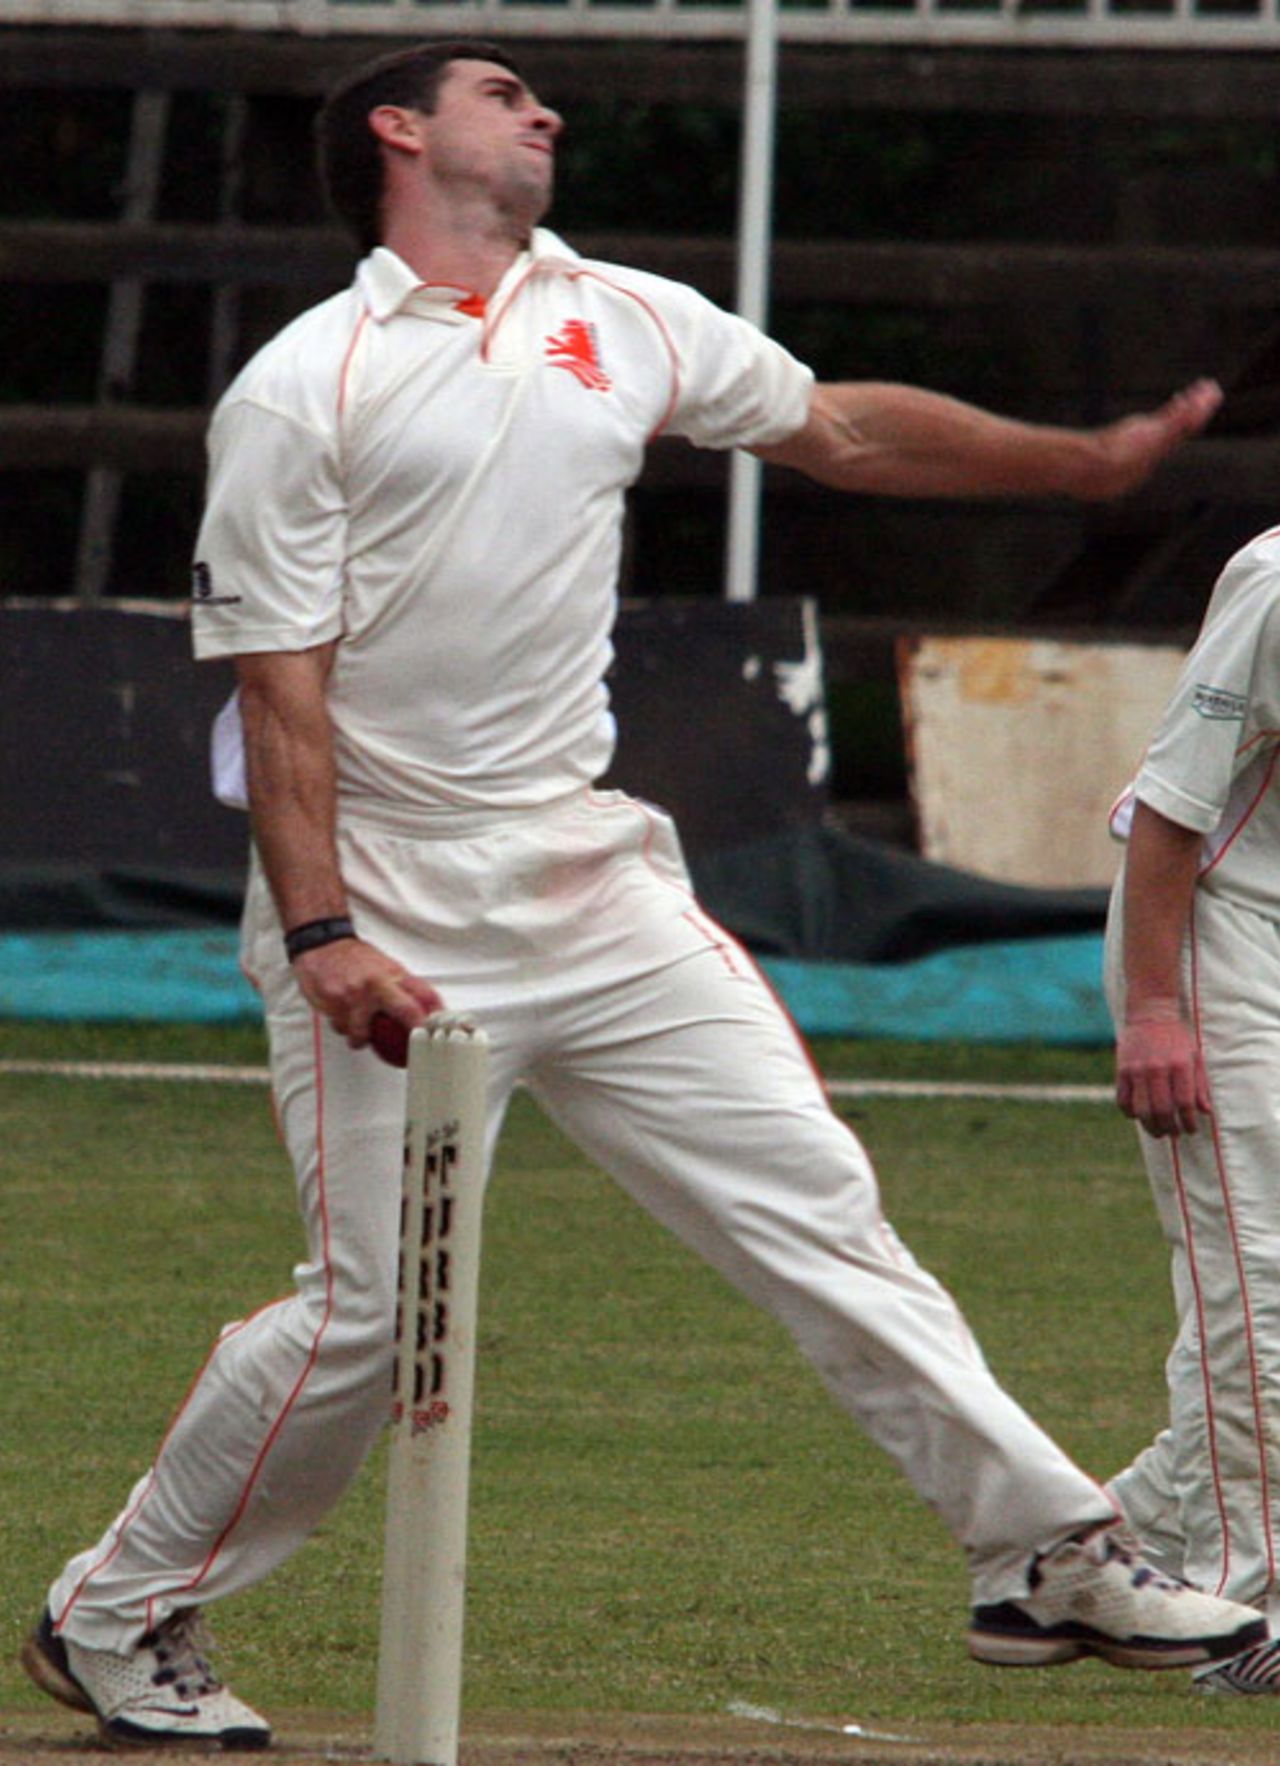 Ryan ten Doeschate in action during his five-wicket haul, Kenya v Netherlands, Intercontinental Cup, Nairobi, 2nd day, February 21, 2010